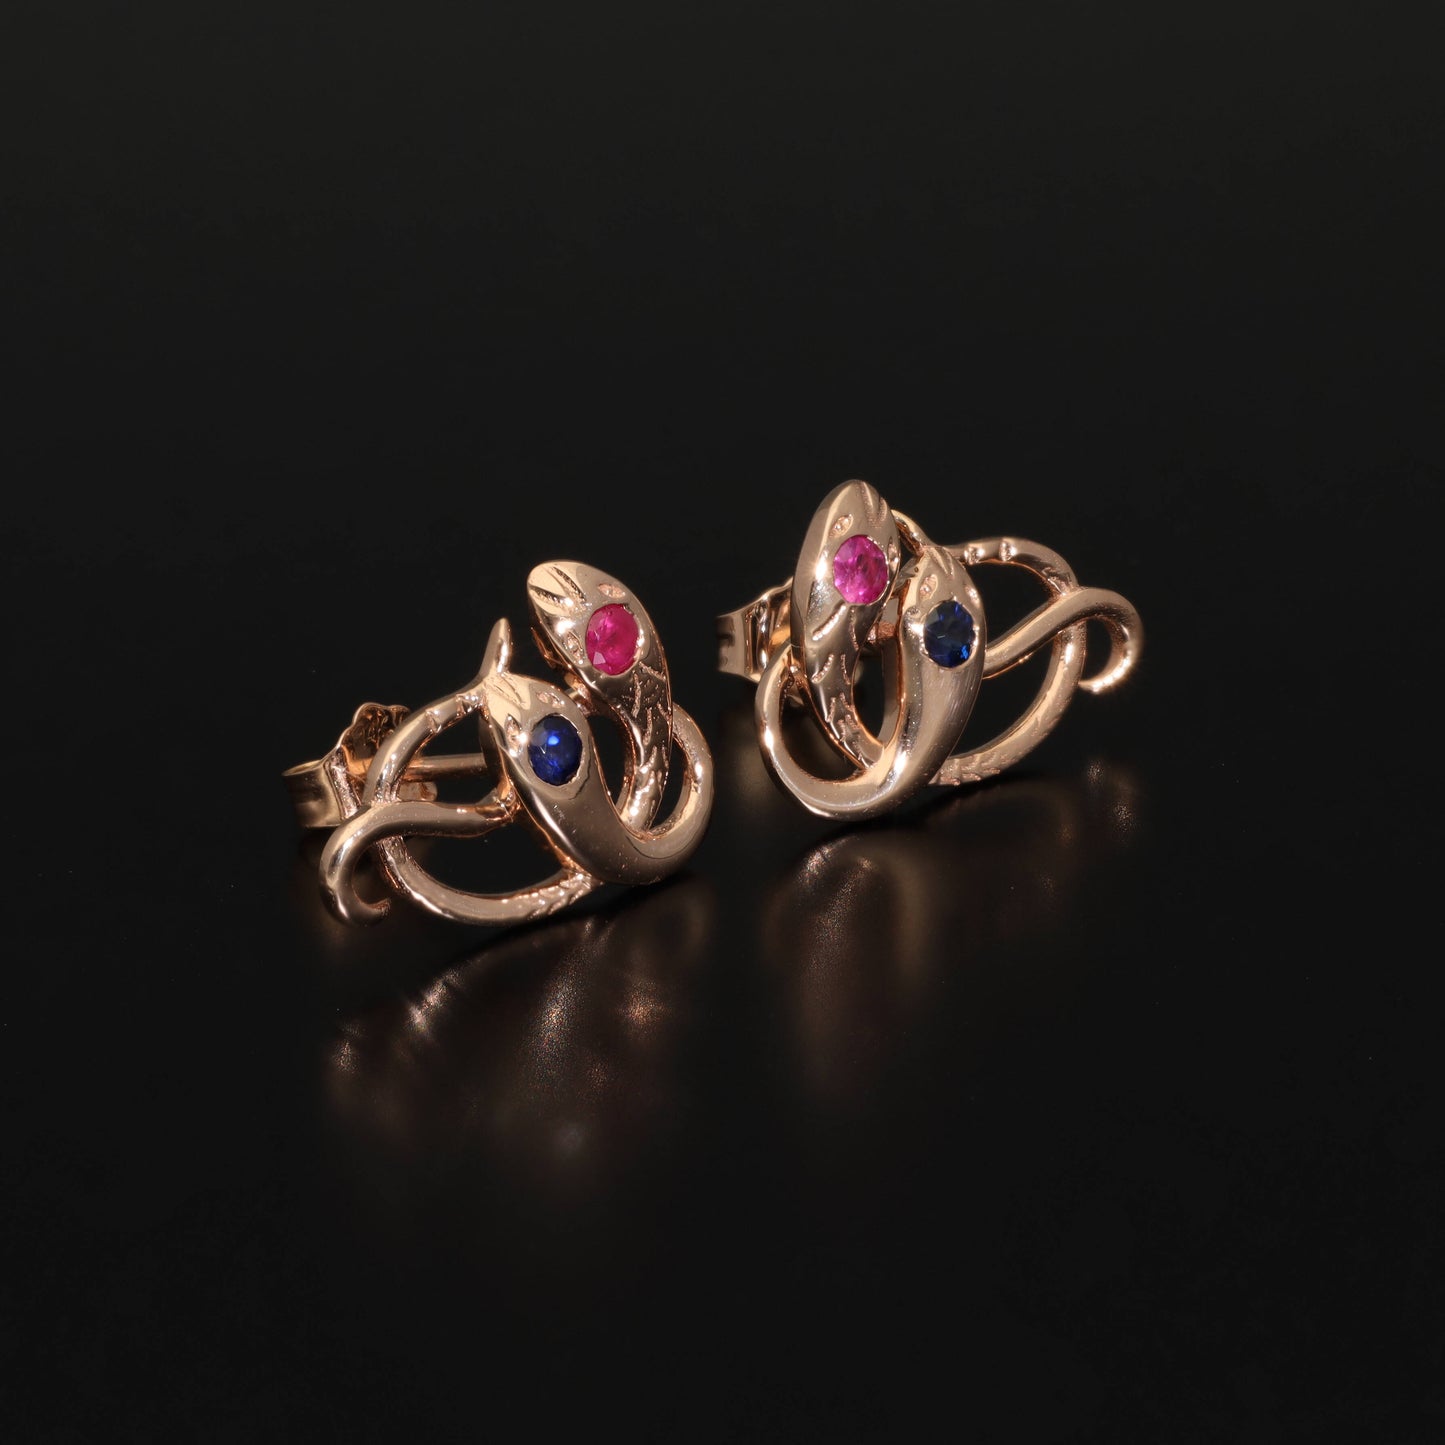 Antique Victorian Ruby Snake Studs, Antique Sapphire Double Headed Snake Earrings, Antique Rose Gold Earrings - Journey Jewellery Online Design Jewelry Shop